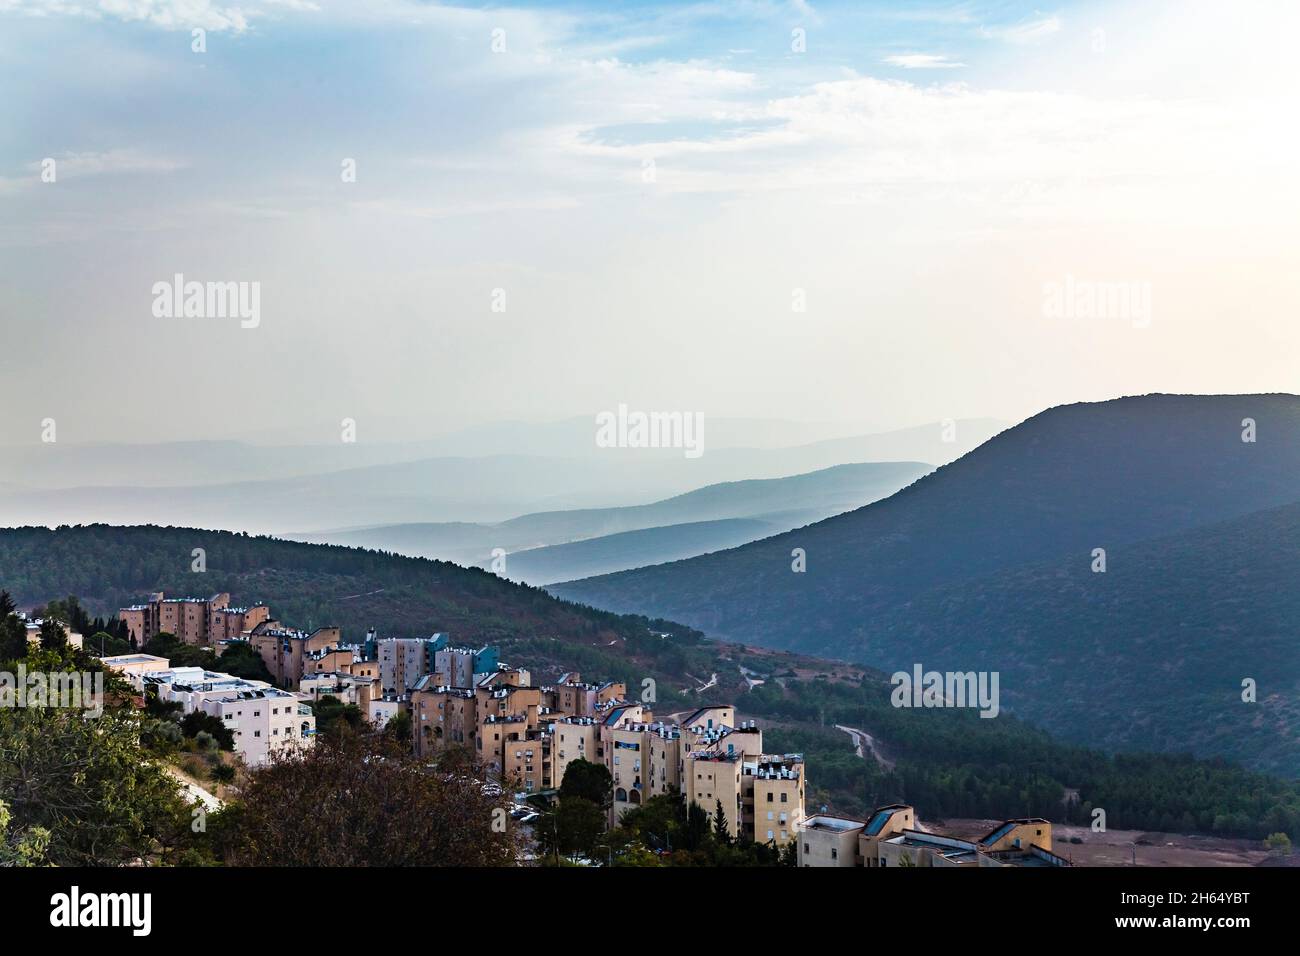 View of Galilee mountains from the Holy city of Safed or Tsfat Israel in the evening. Mountain hills in fog. Stock Photo